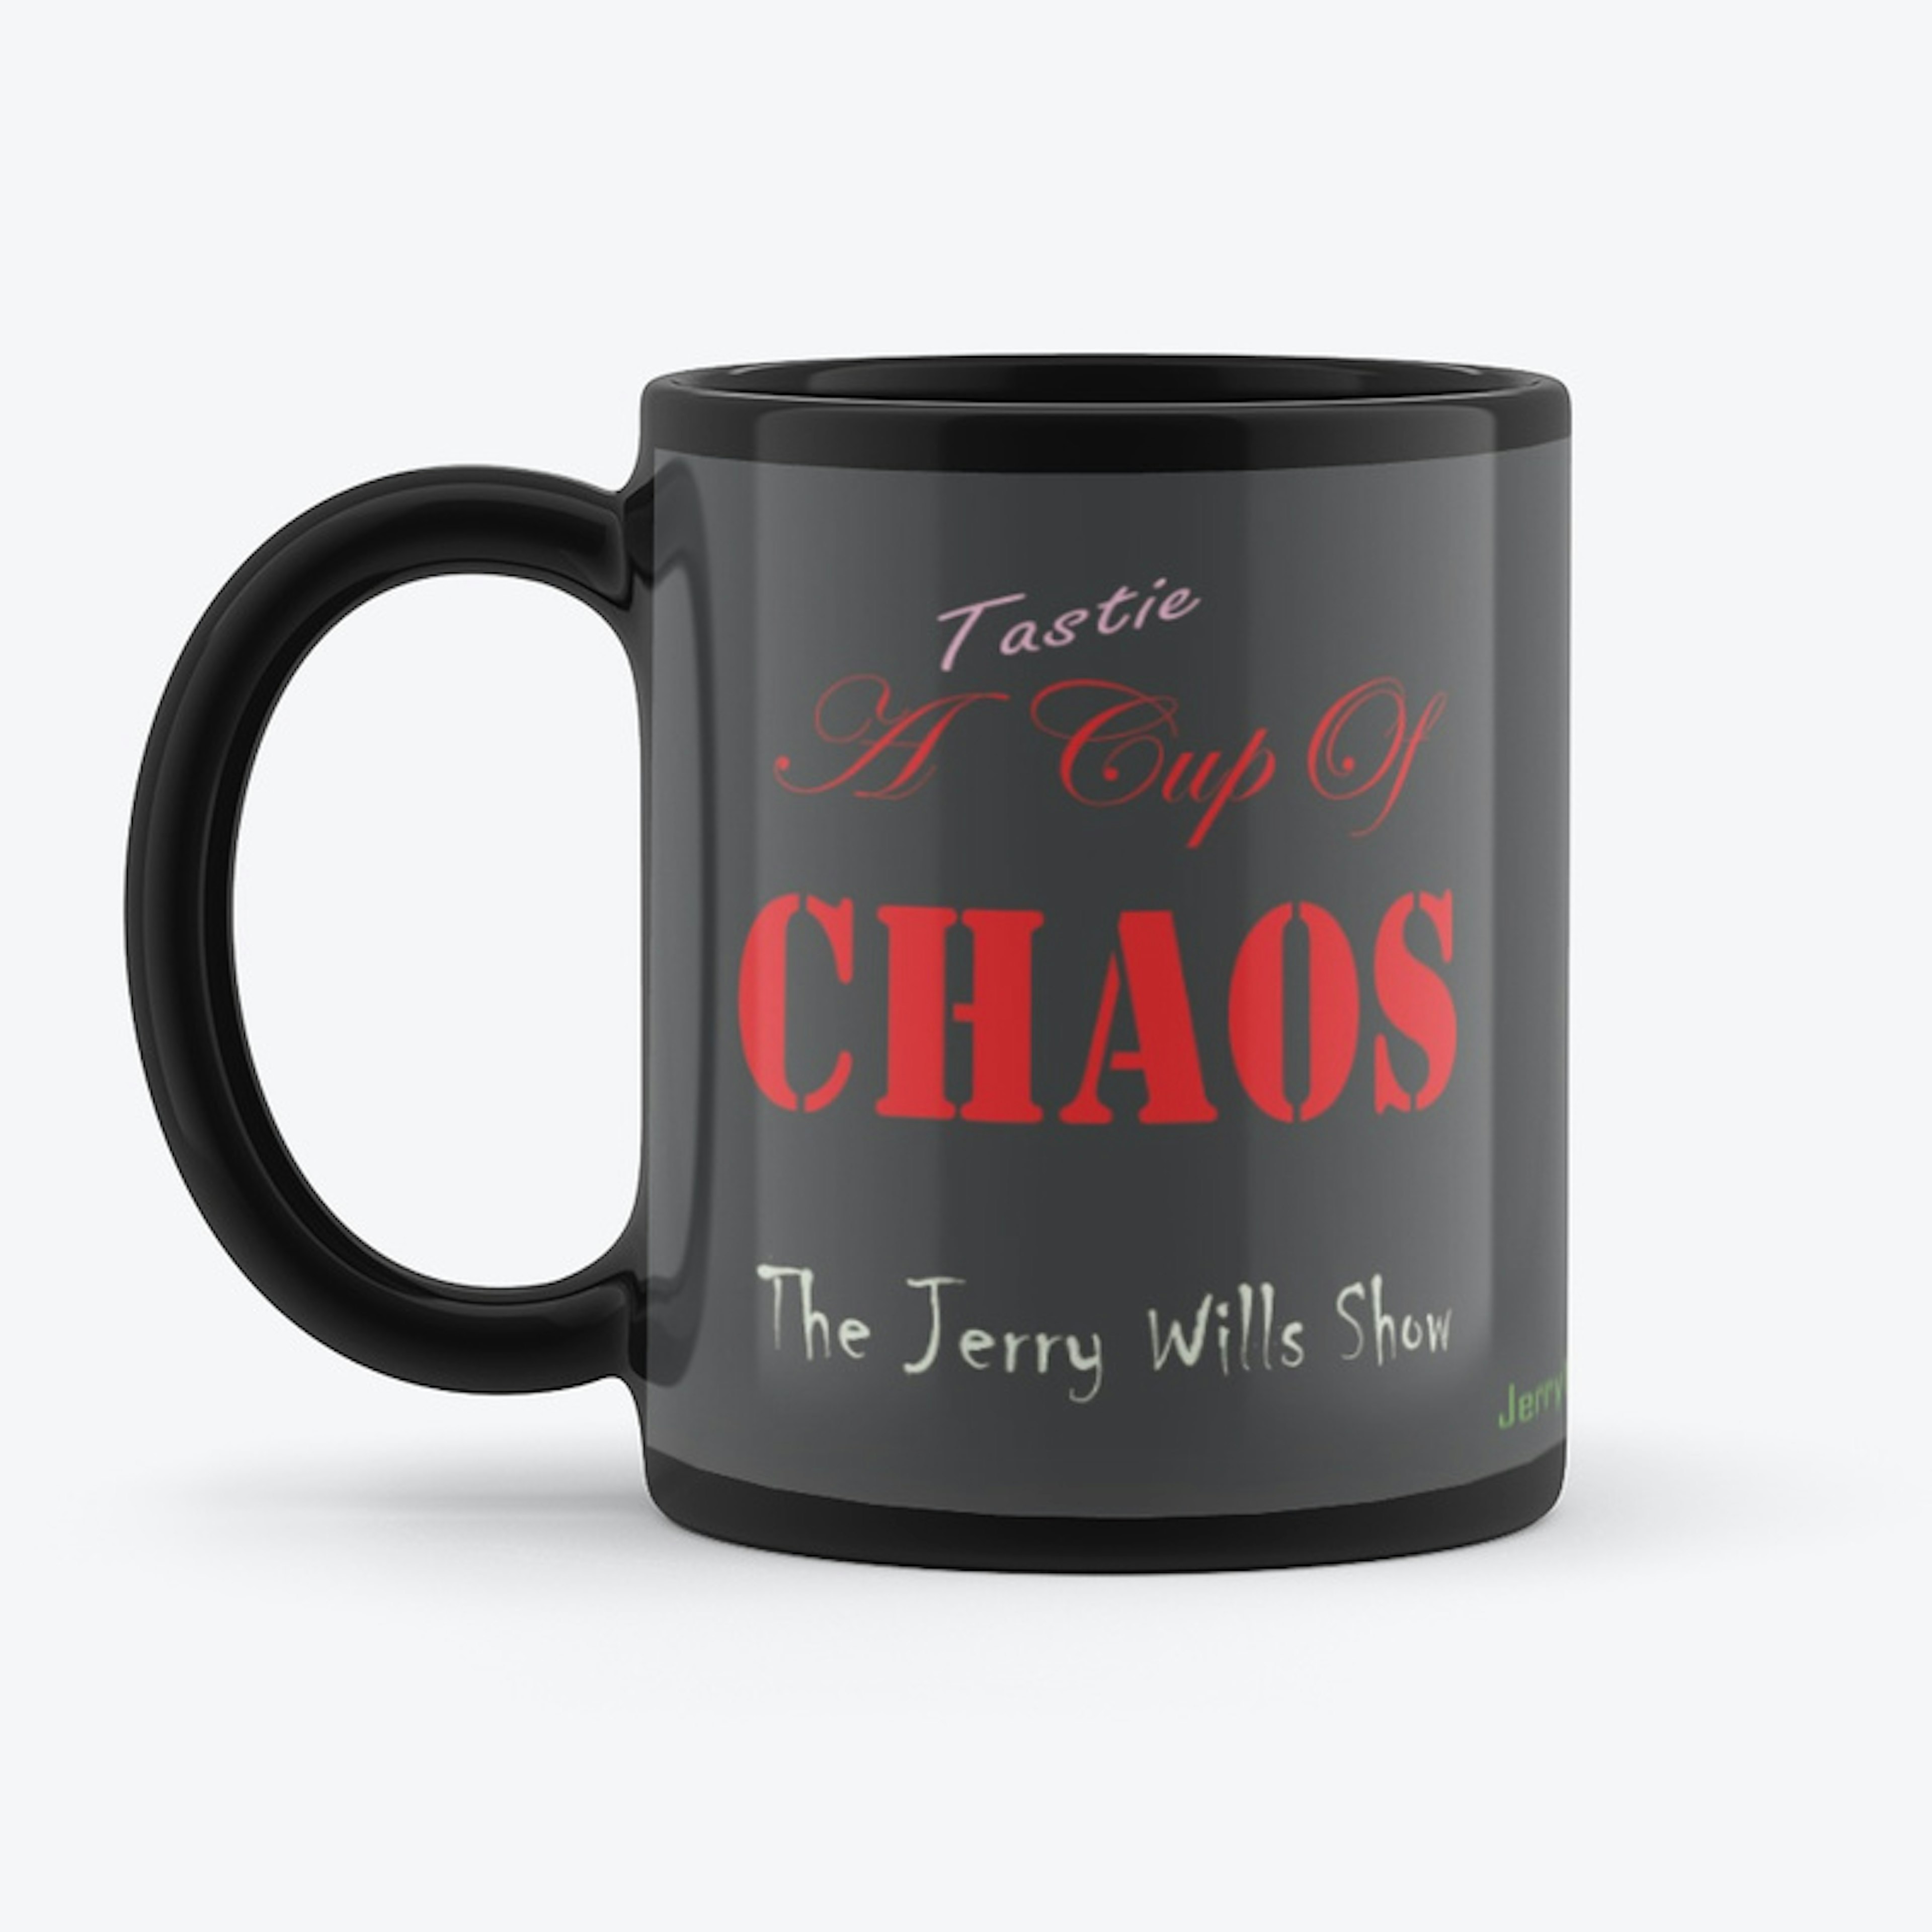 A Tasty Cup of Chaos!